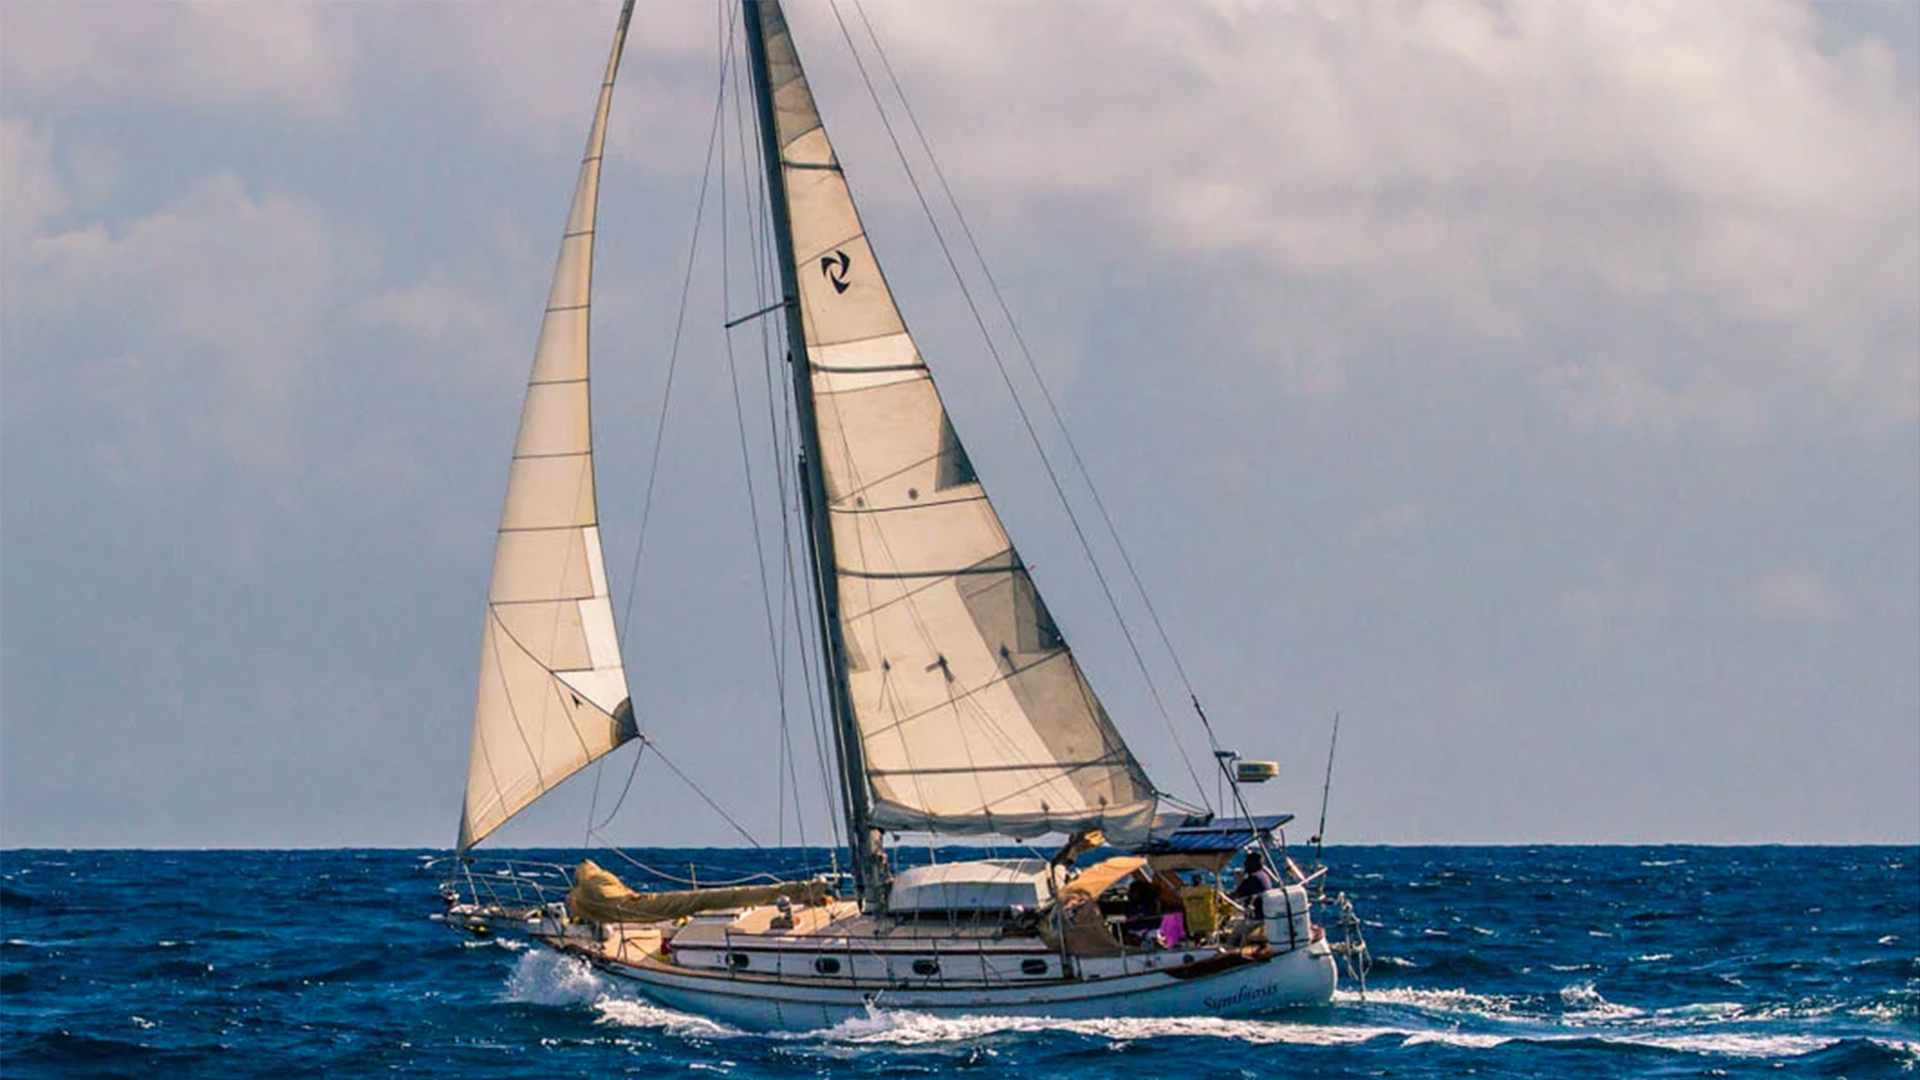 Author Scott Neuman's sailboat, Symbiosis, on passage between St. Lucia and Martinique in 2017.